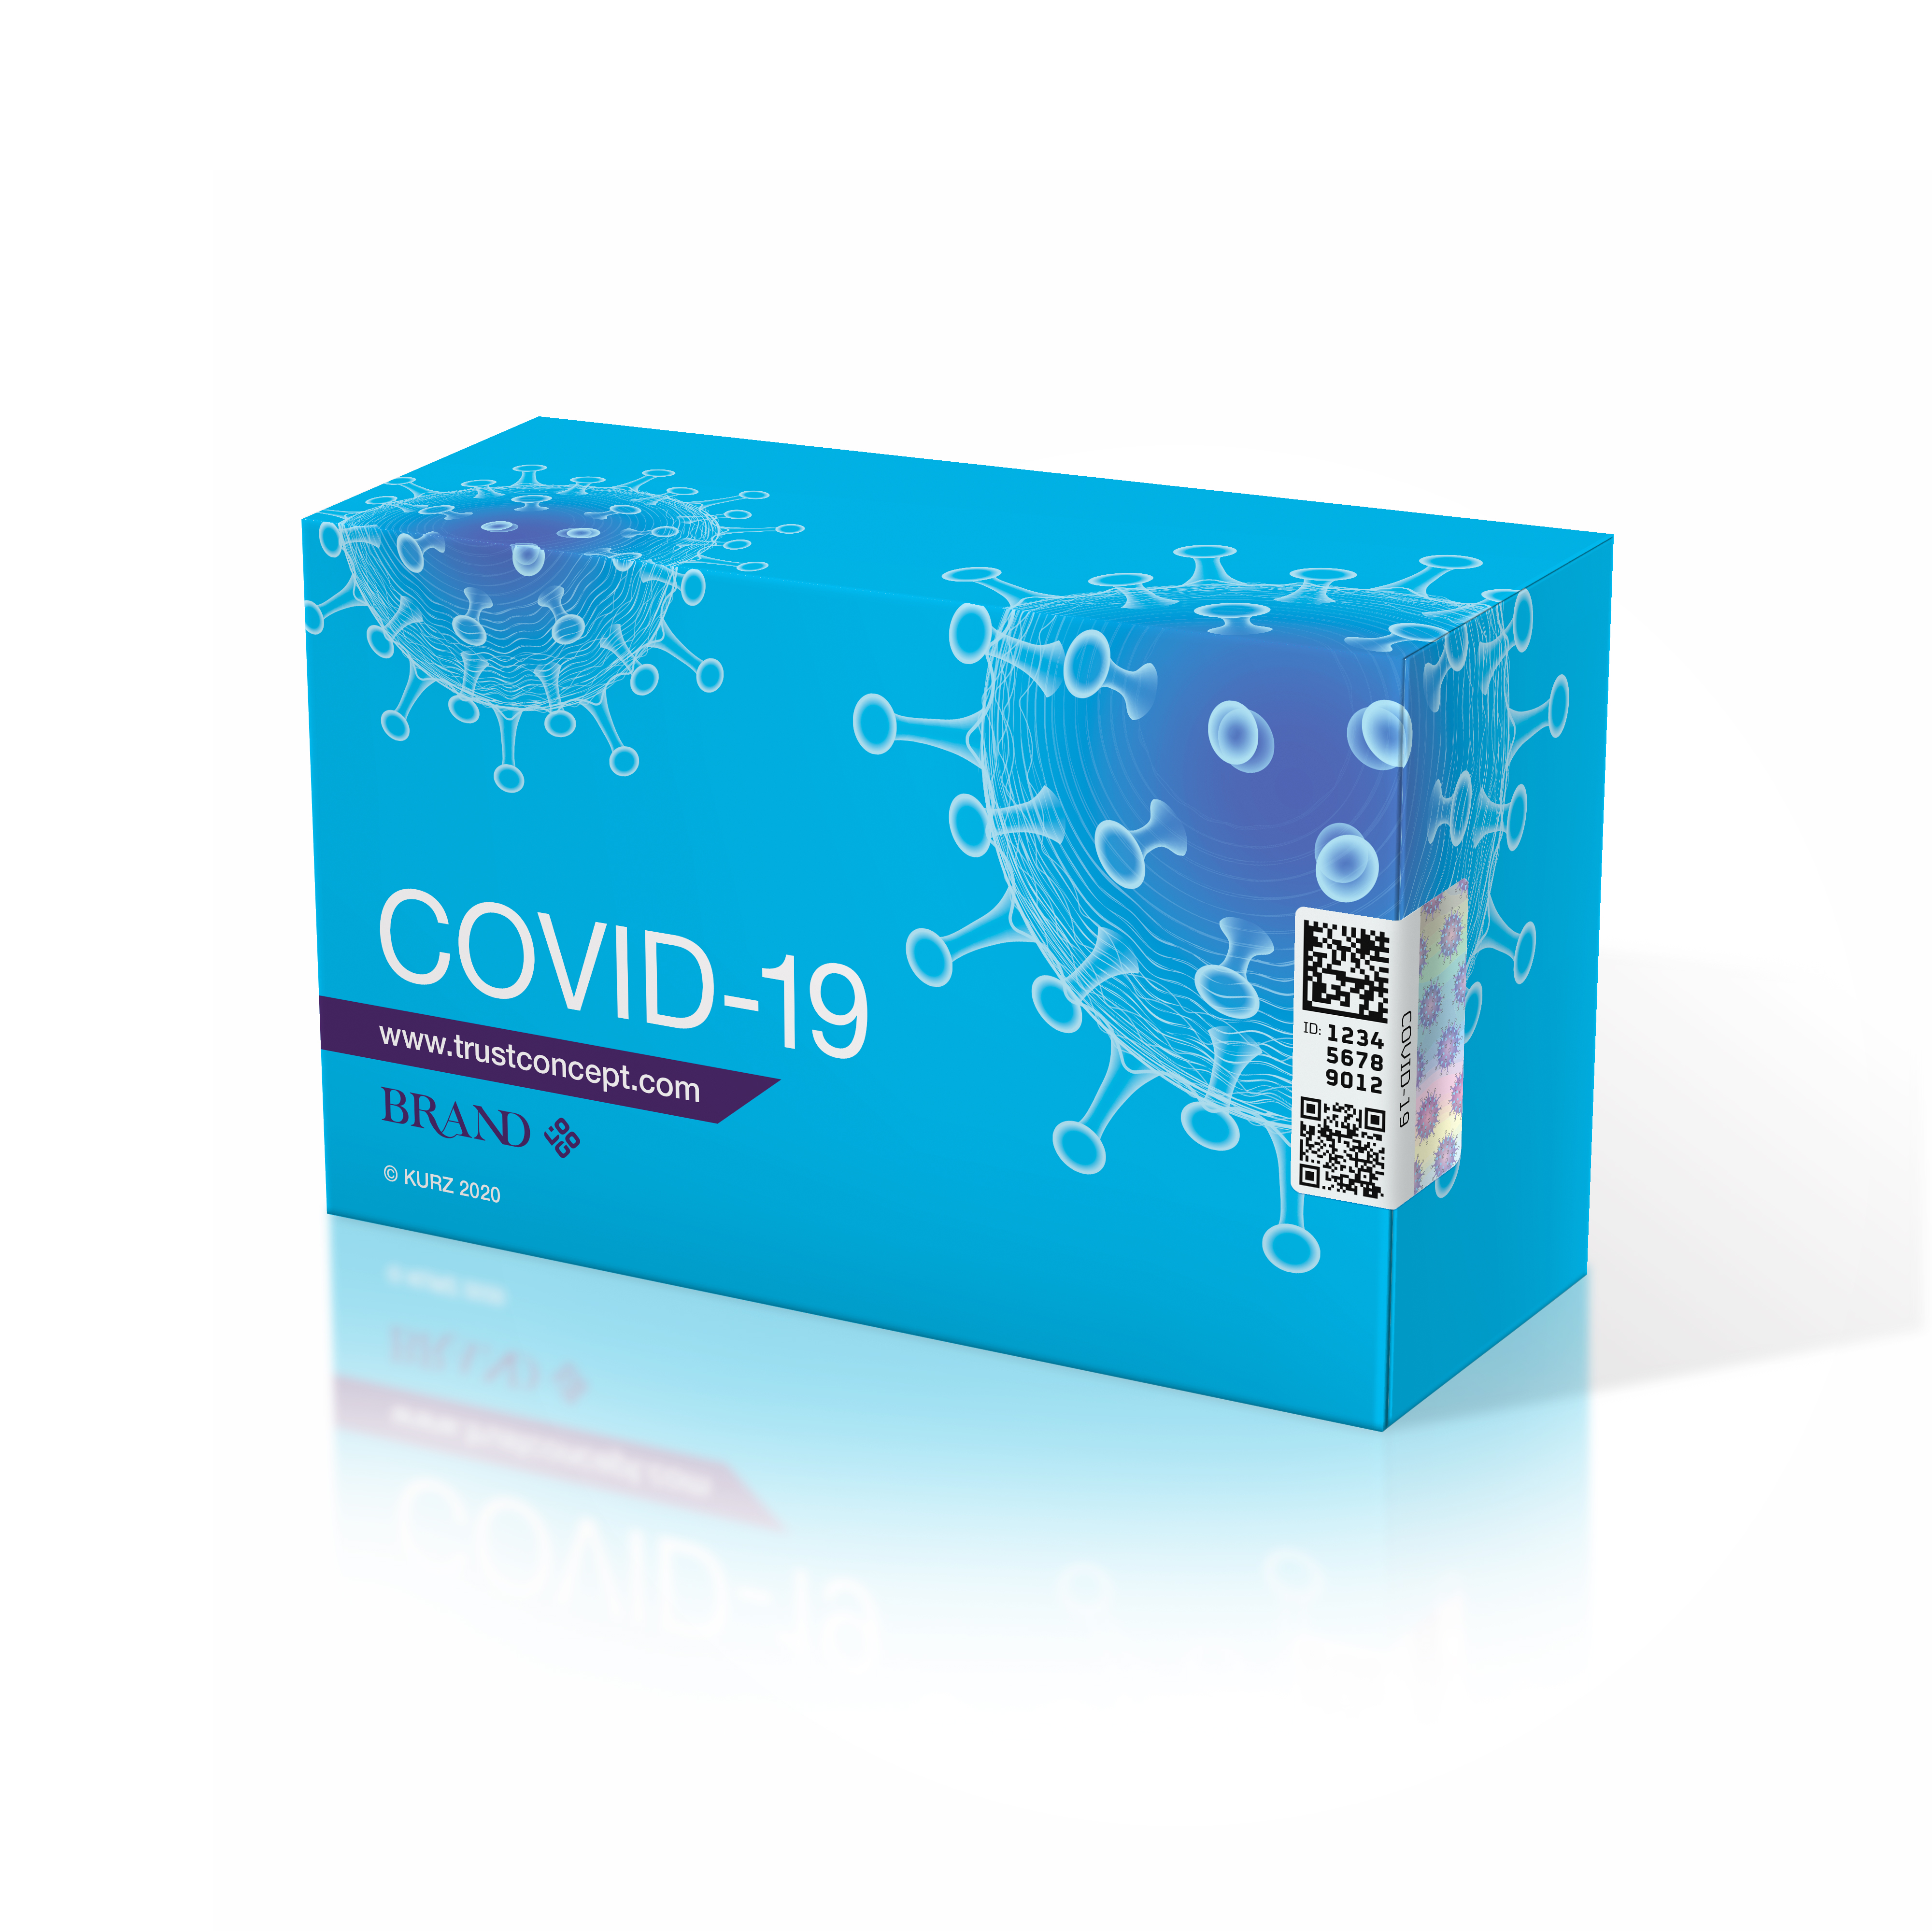 KURZ - new product protection and traceability solution for COVID pharmaceuticals